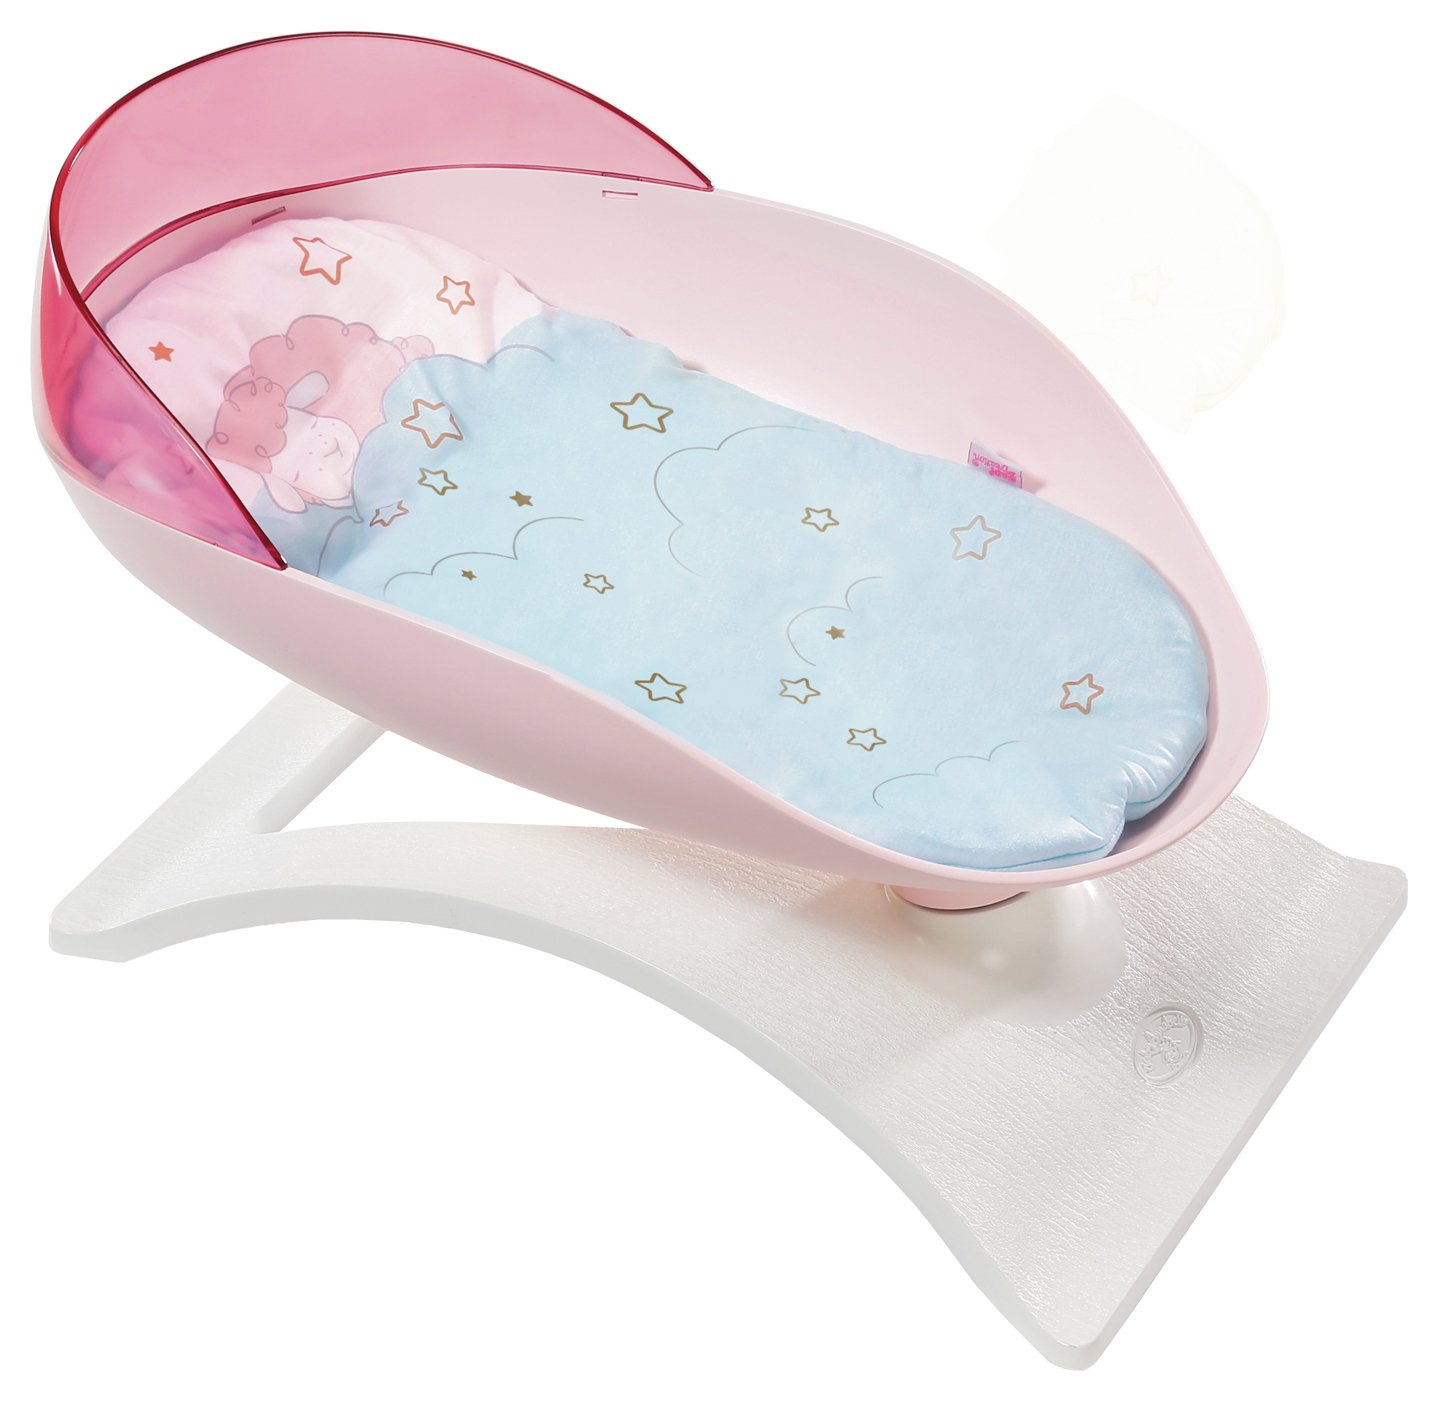 Baby Annabell Sweet Dreams Rocker review